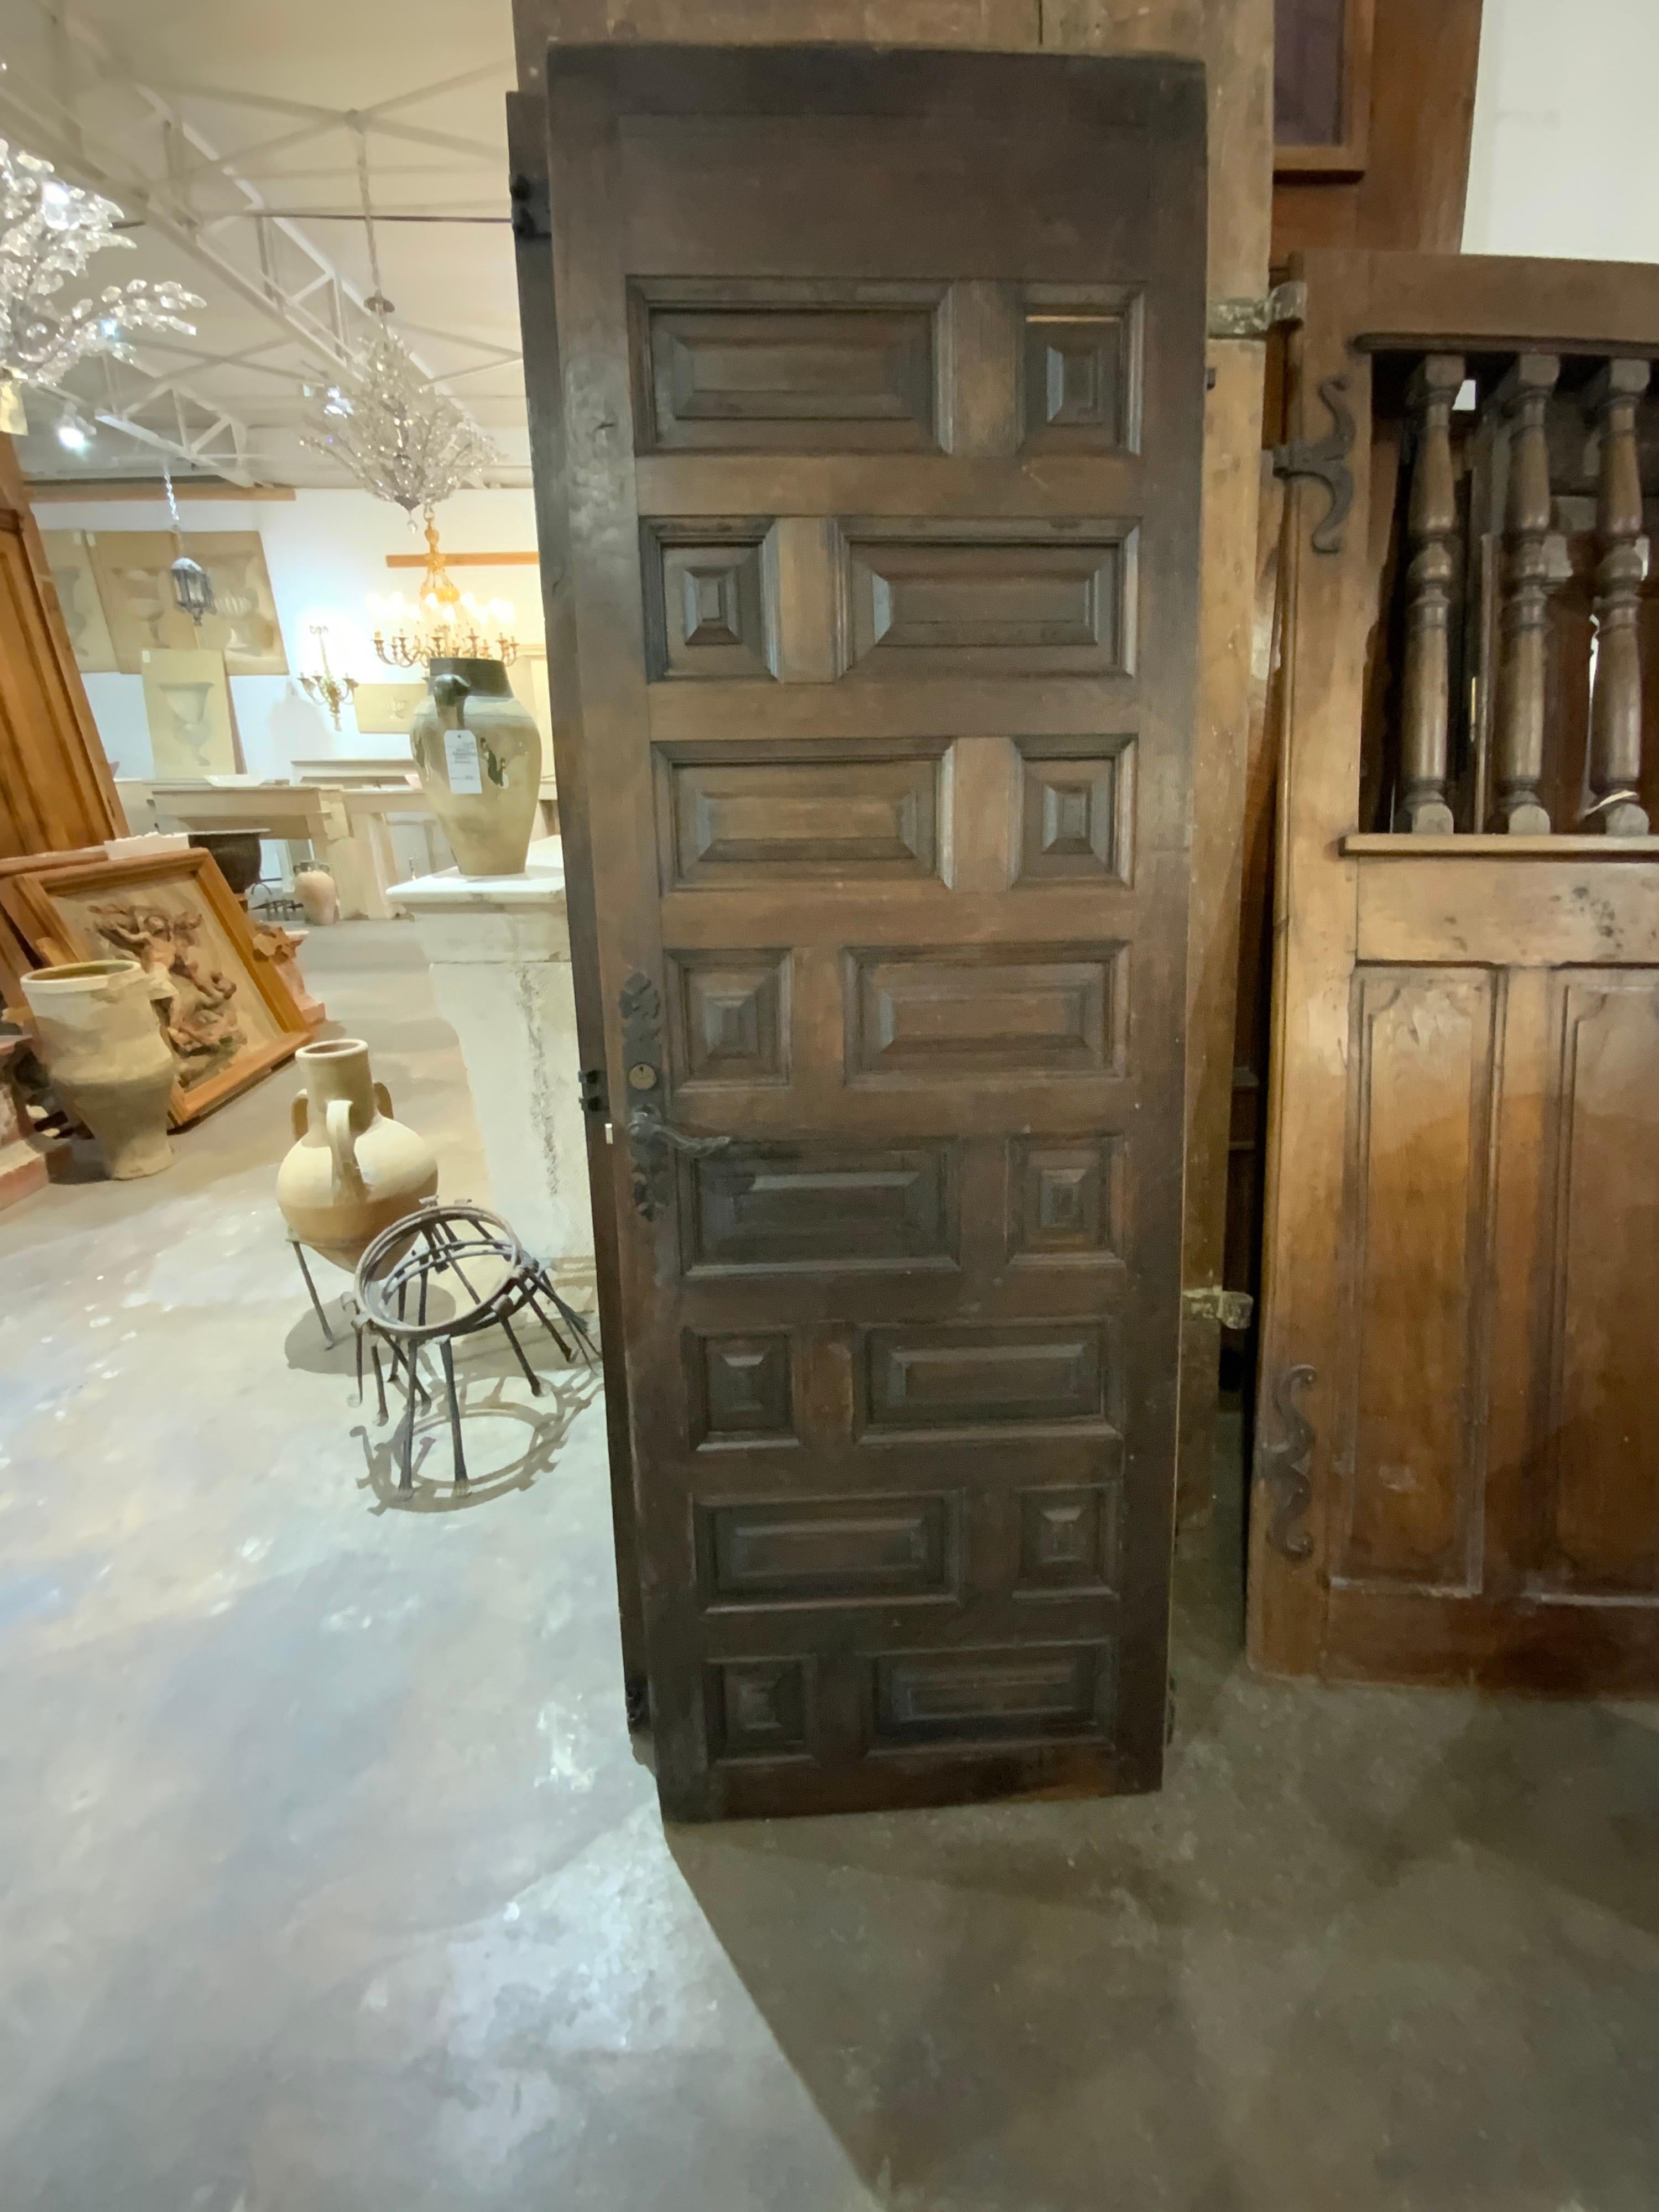 This Spanish door dates back to the 1910s. Item is made of oak and contains original lock and hardware. Origin; Spain.